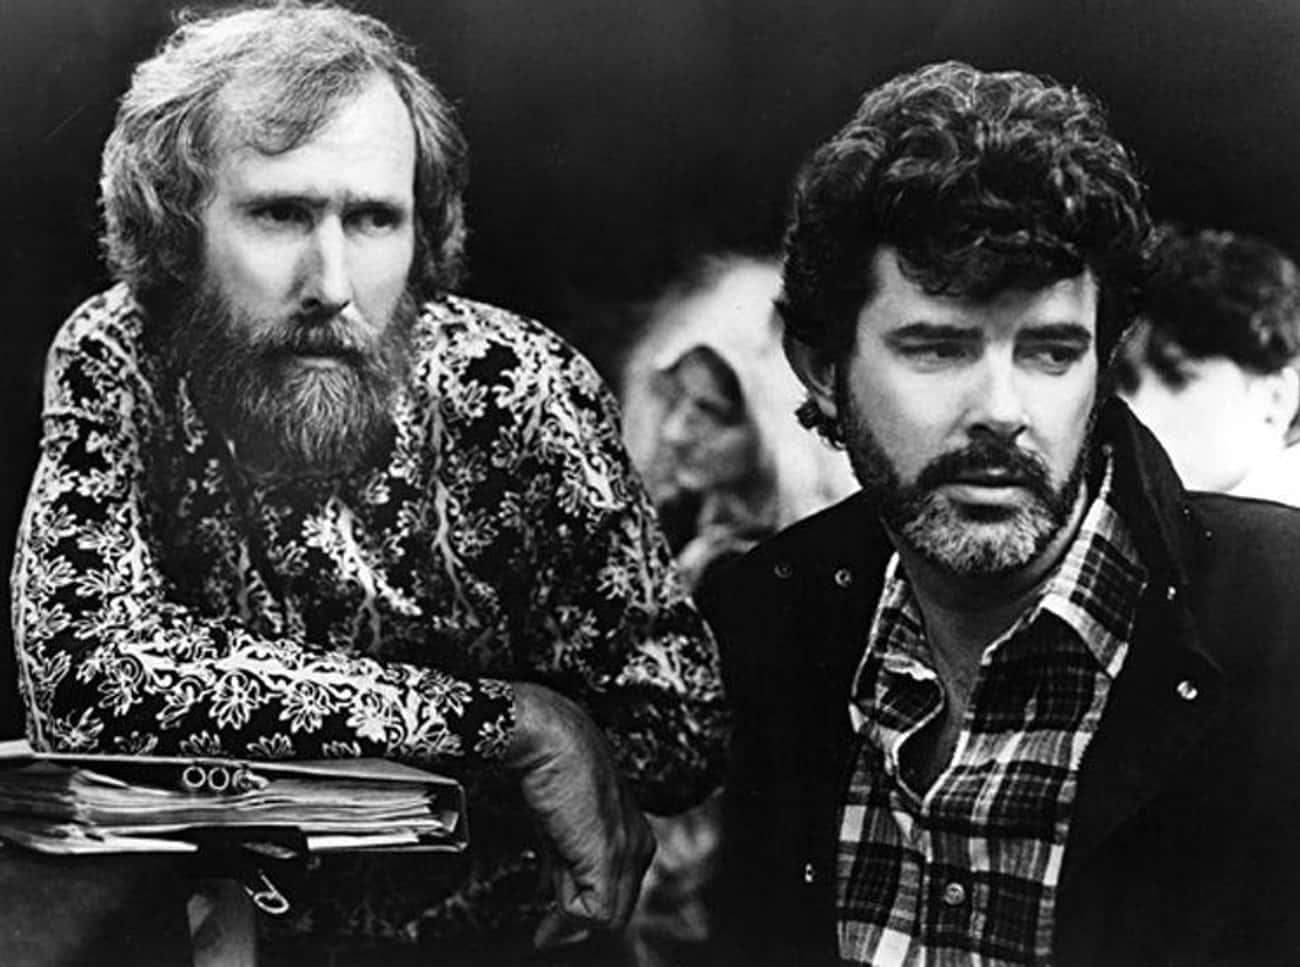 Jim Henson And George Lucas On The 'Labyrinth' Set